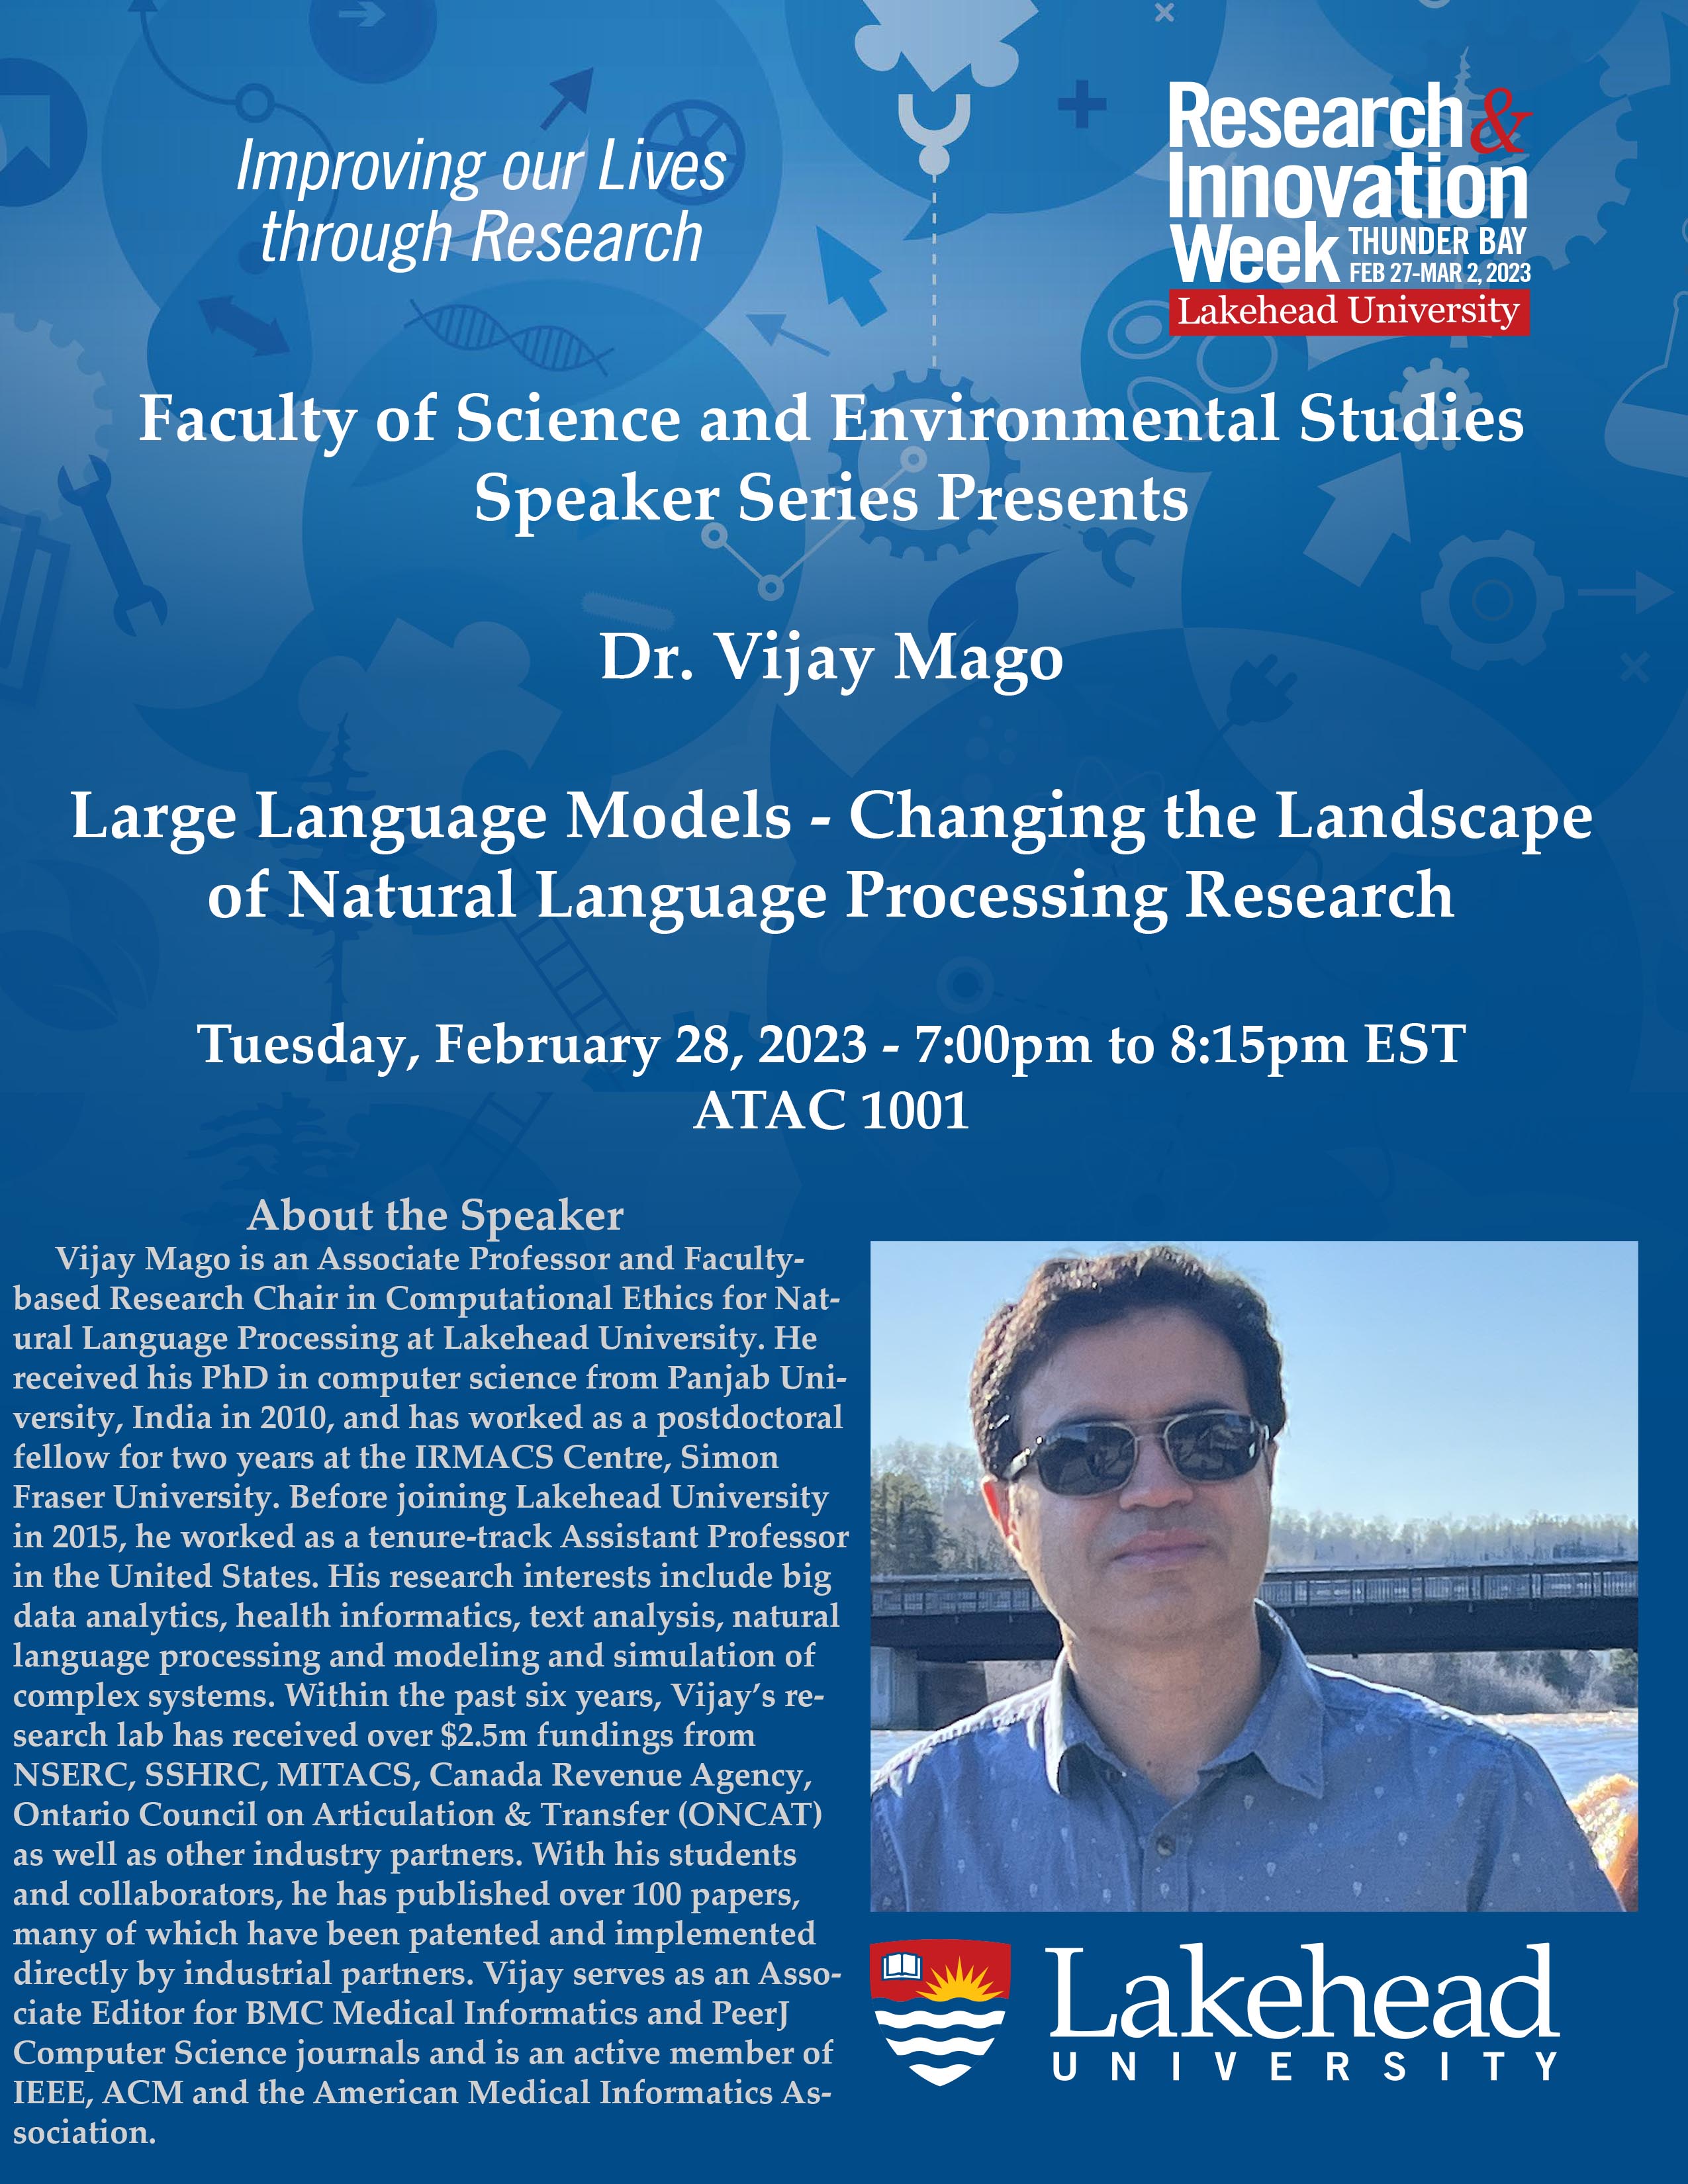 Poster for:  "Large Language Models - Changing the landscape of Natural Language Processing Research", Dr. Vijay Mago: Science and Environmental Studies Speaker Series Presentation